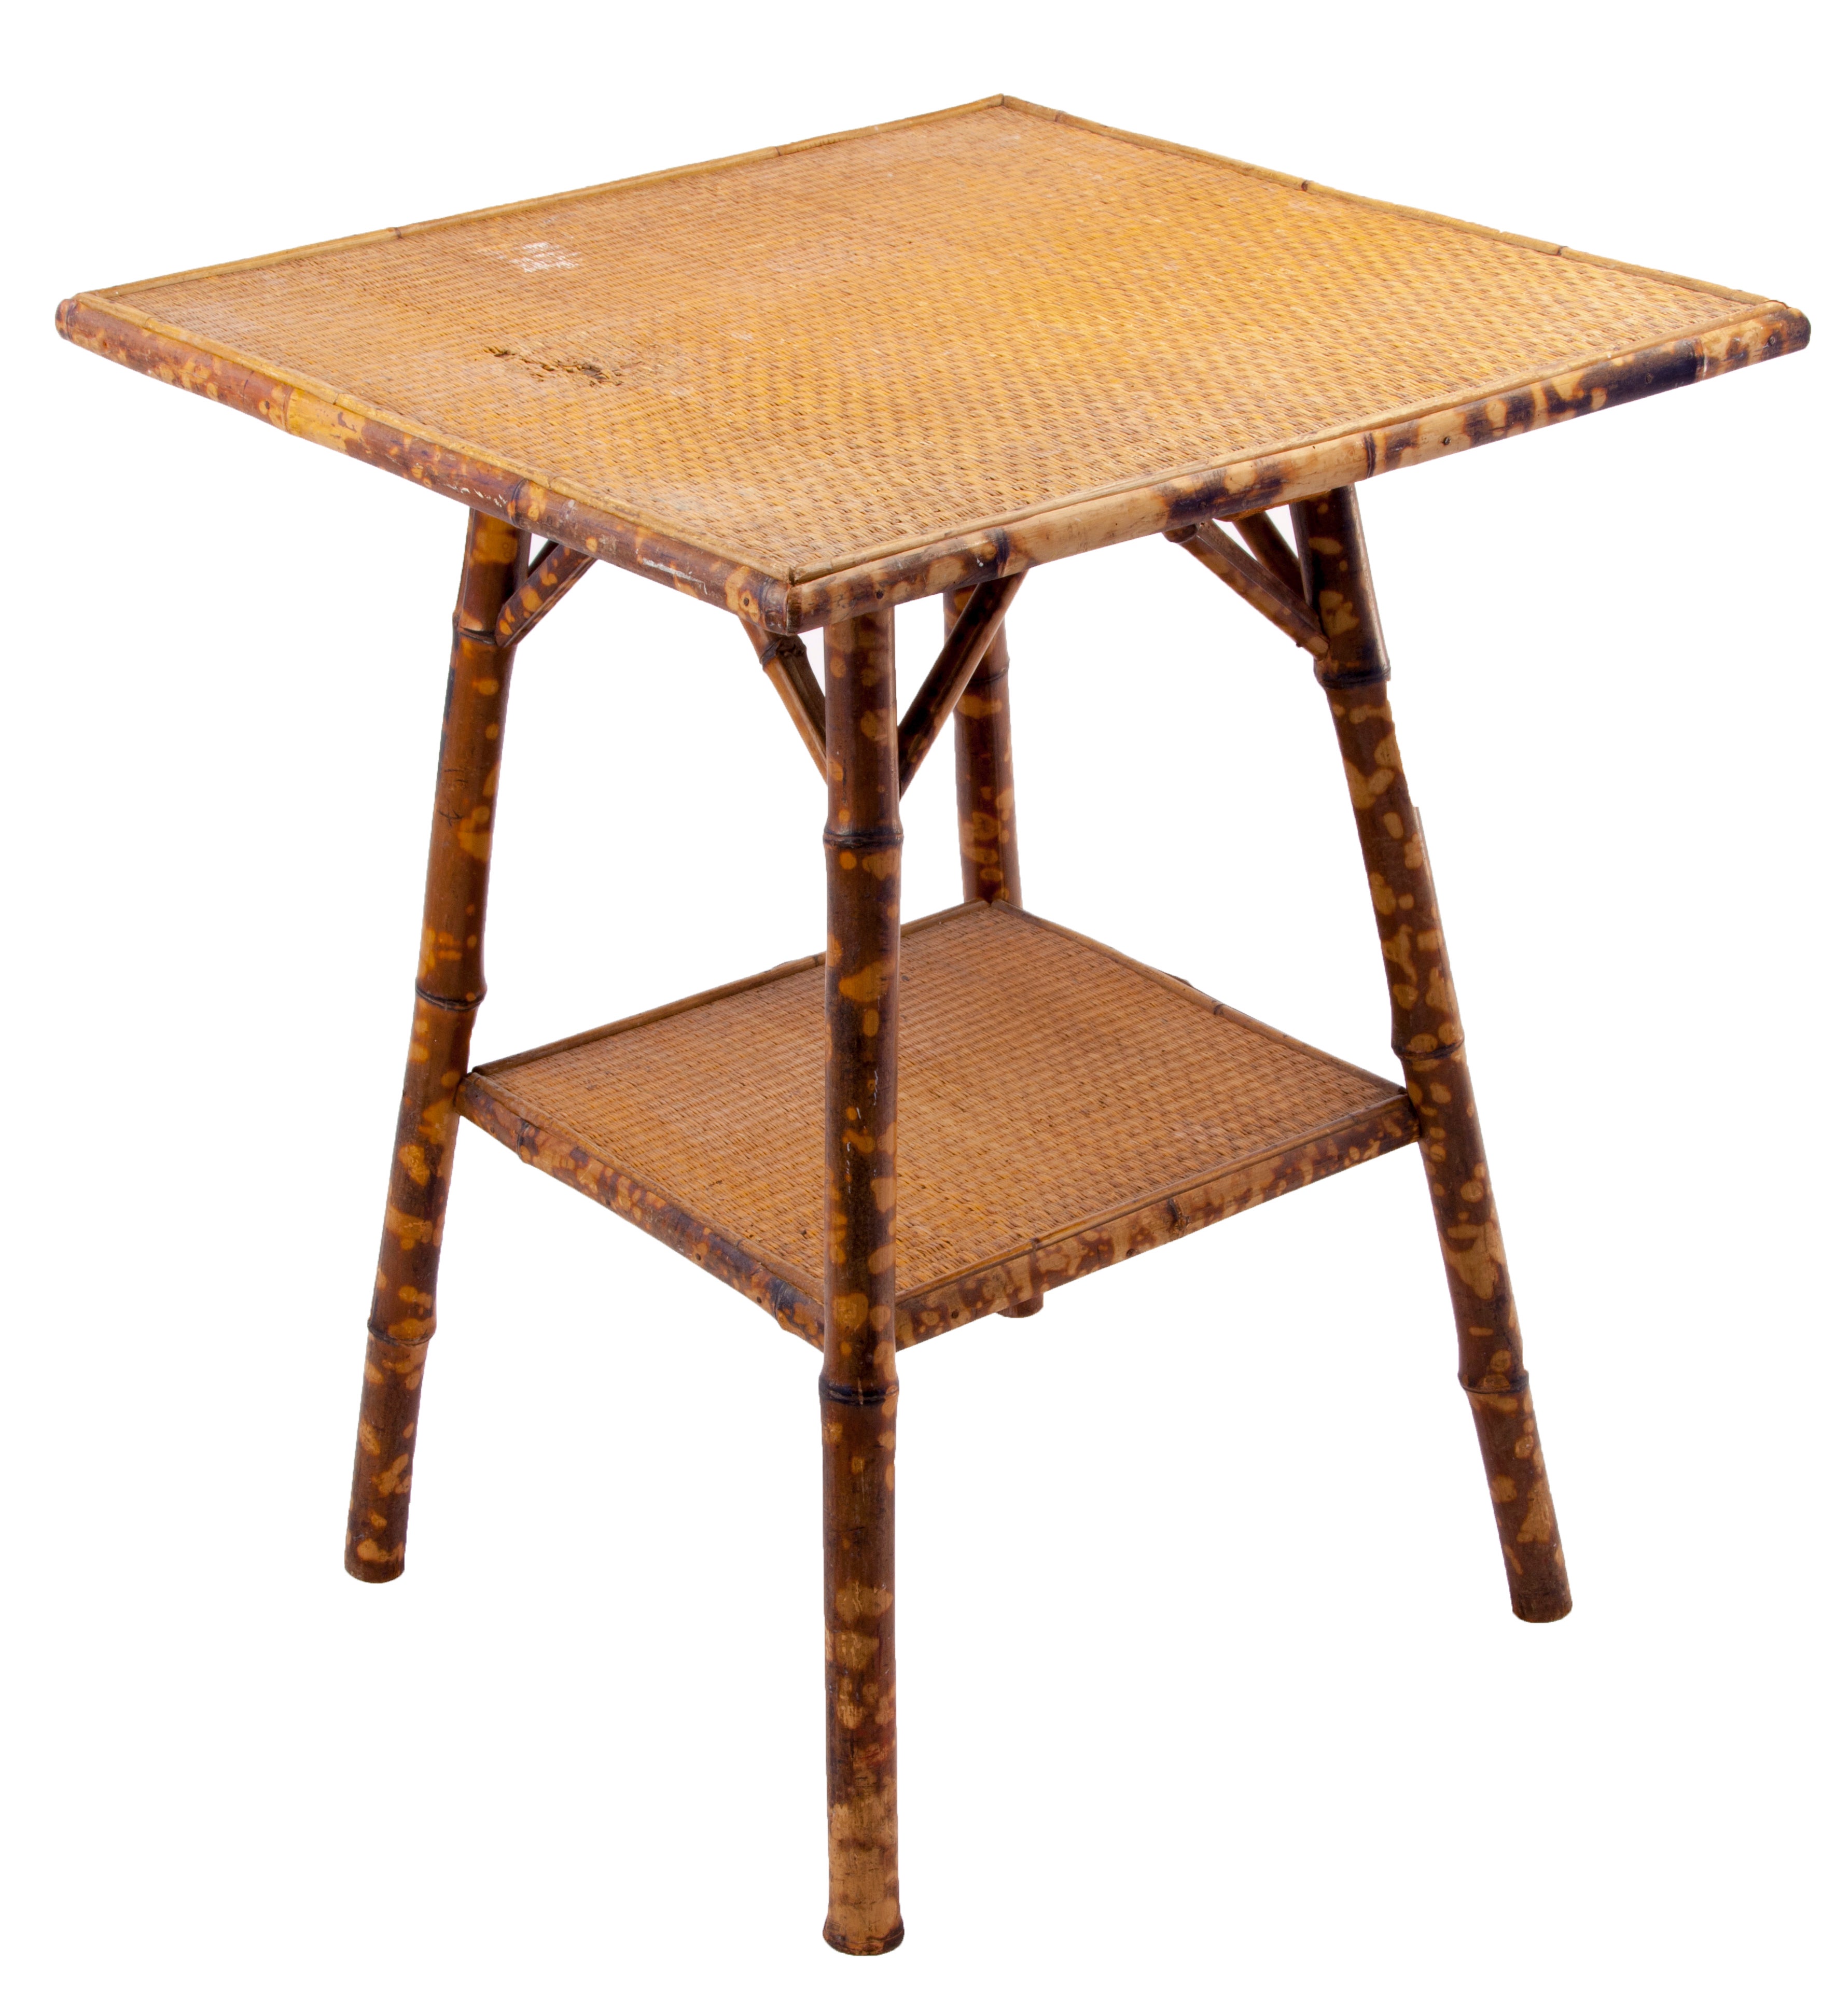 Victorian Tortoise Shell Bamboo and Woven Cane Plant Stand